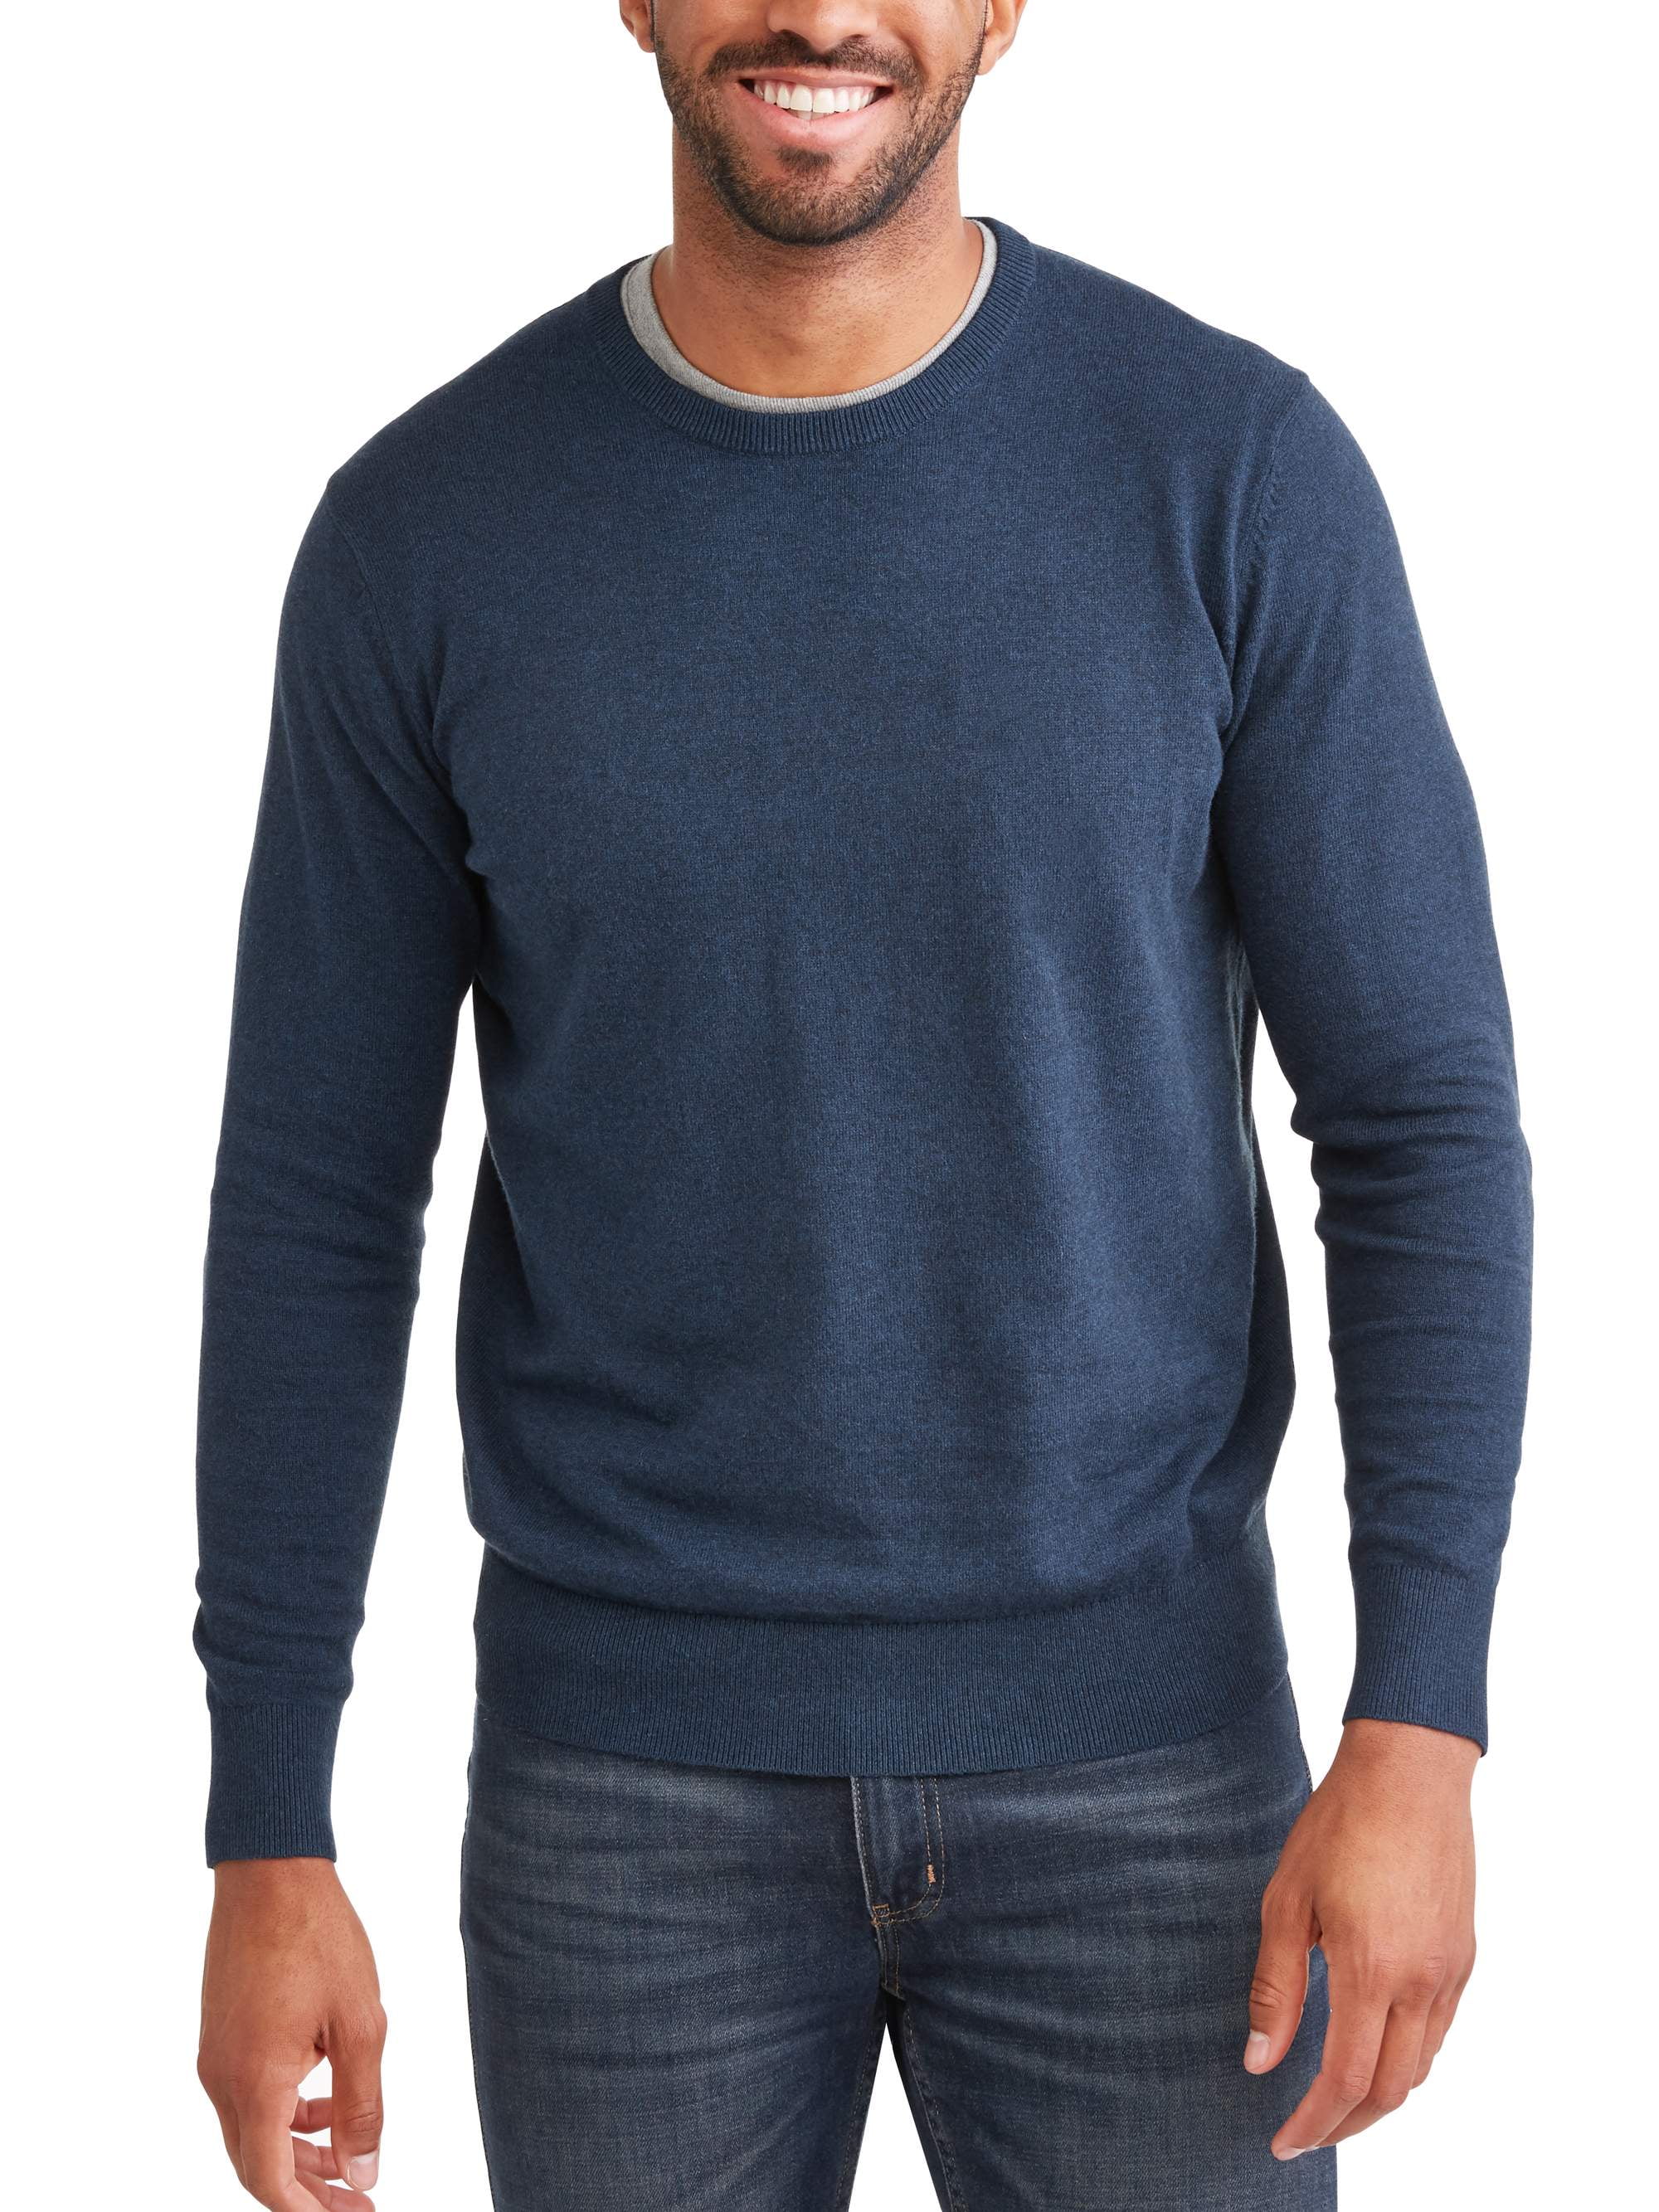 George Men's Crew Sweater, Up to Size 5XL